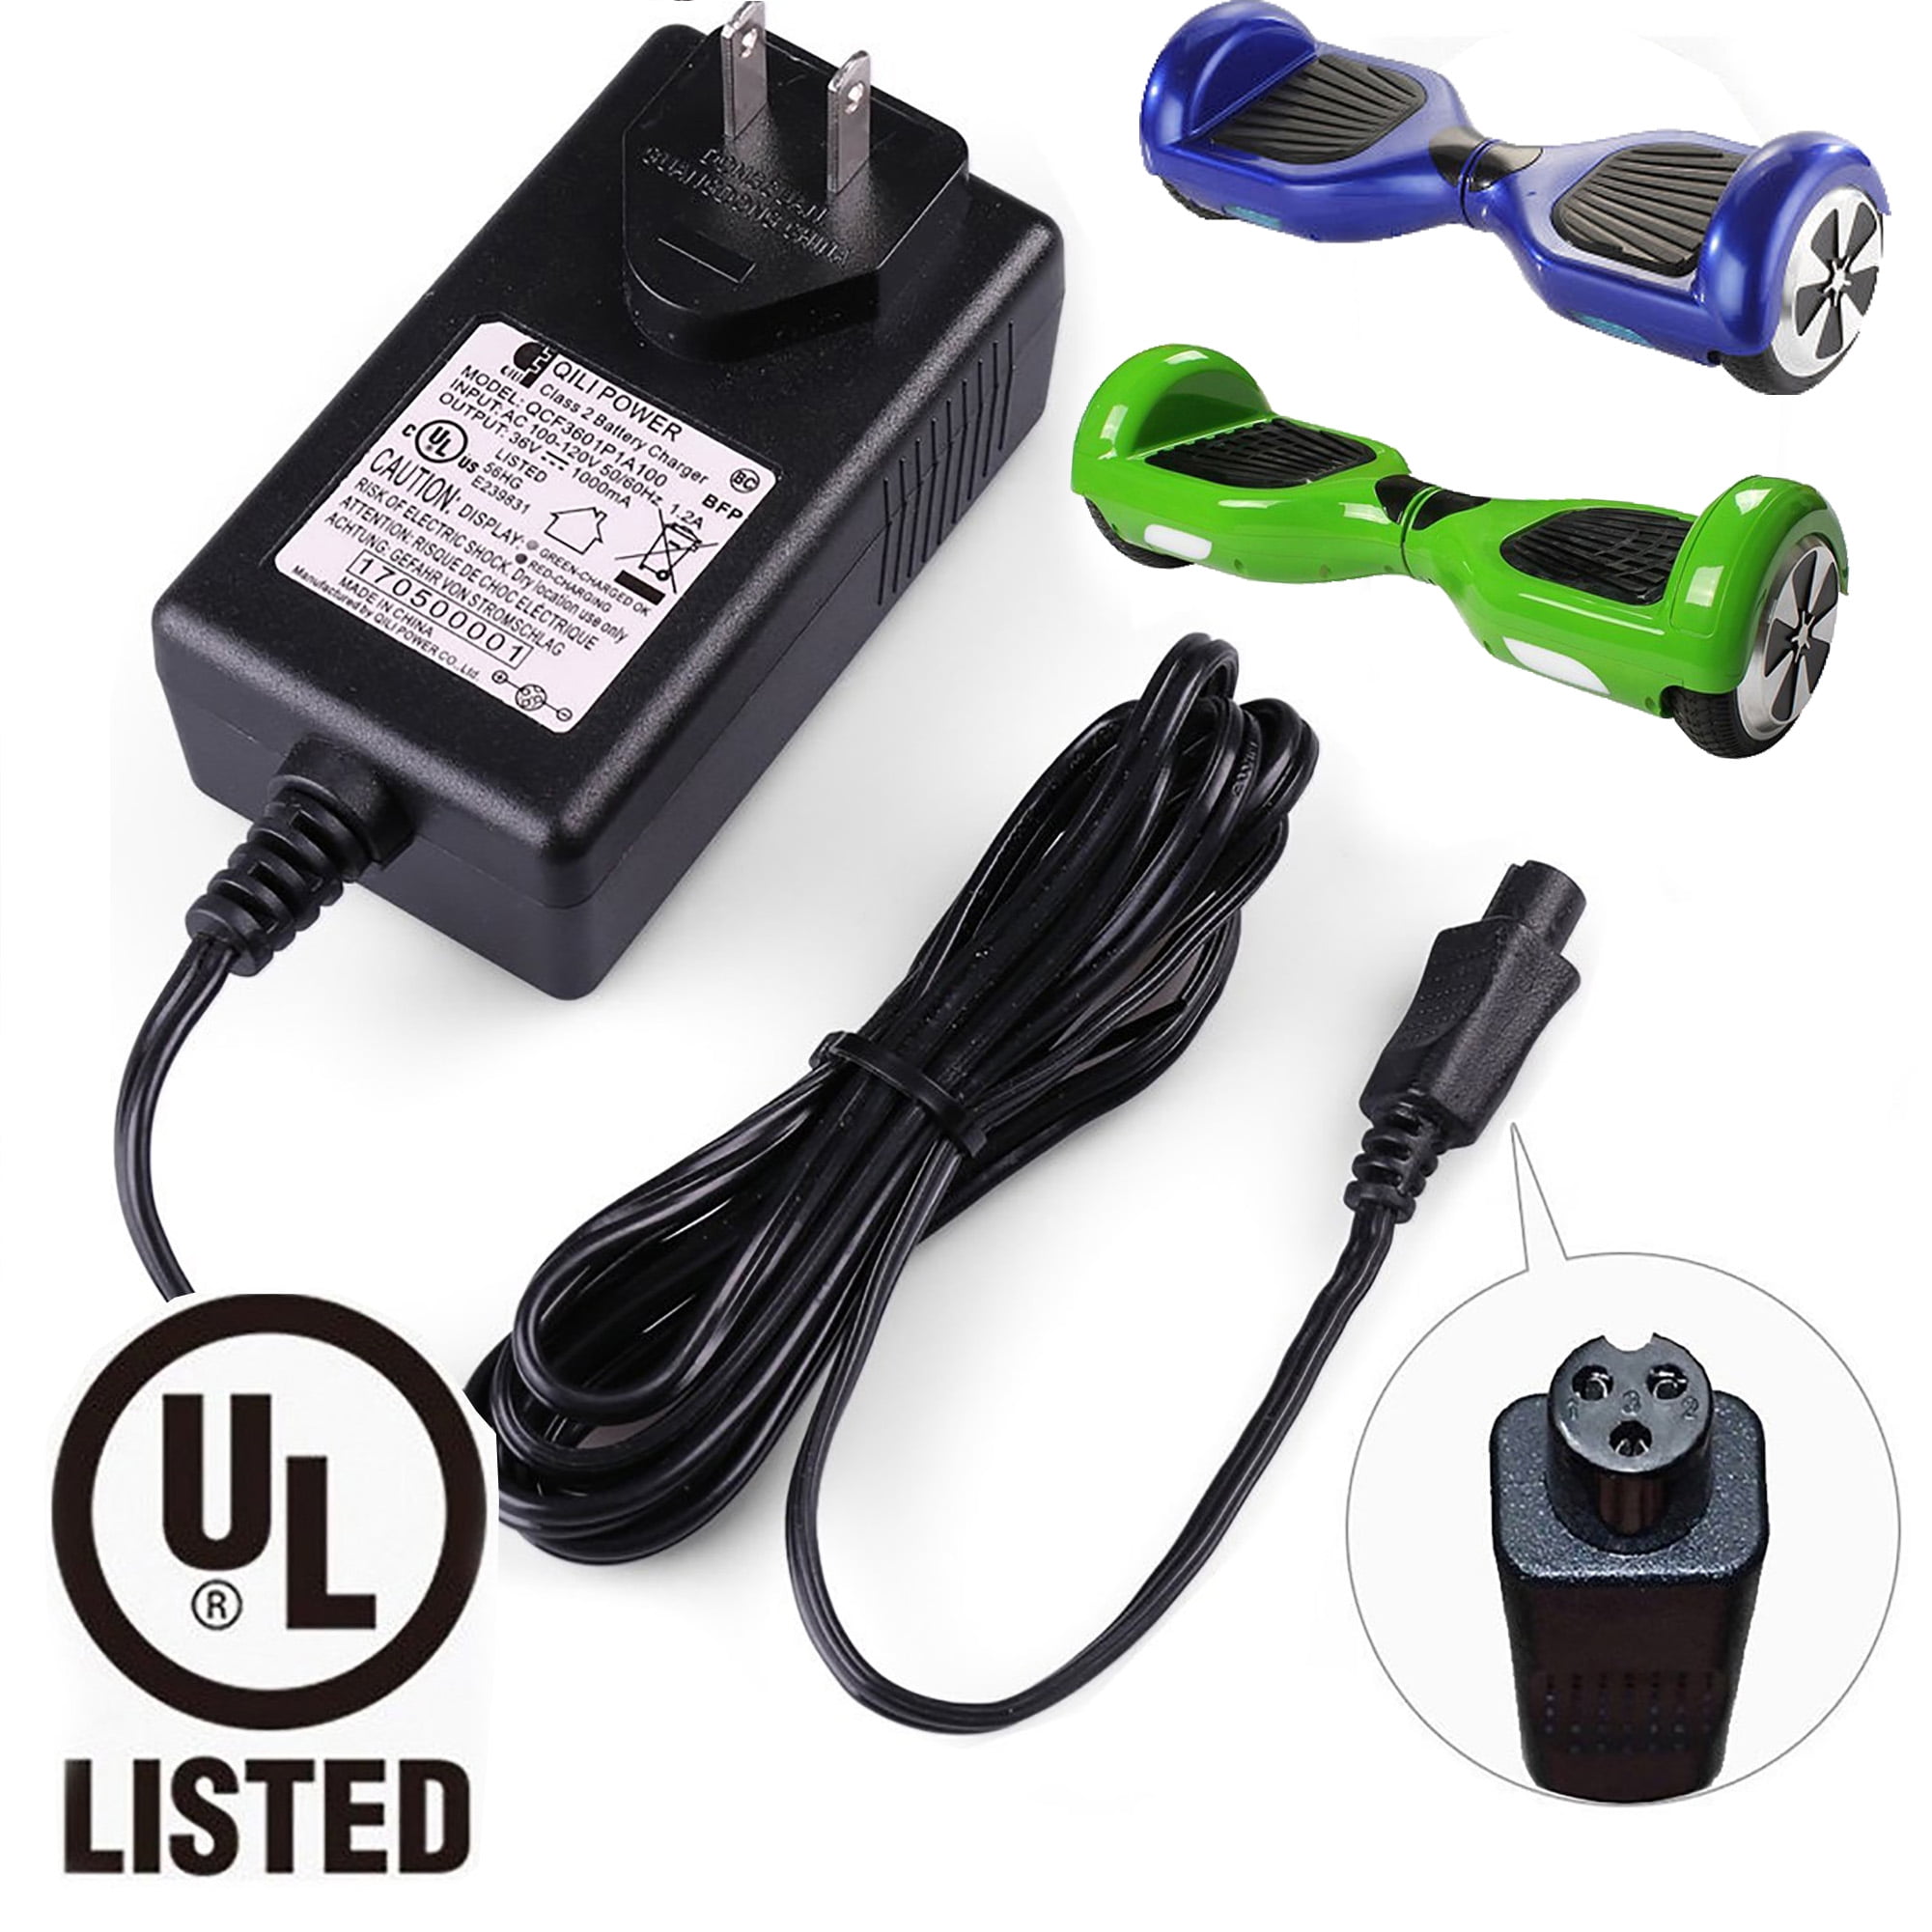 Renewed Float Charger Moultrie 6-Volt Battery Charger LED Light Indicator 